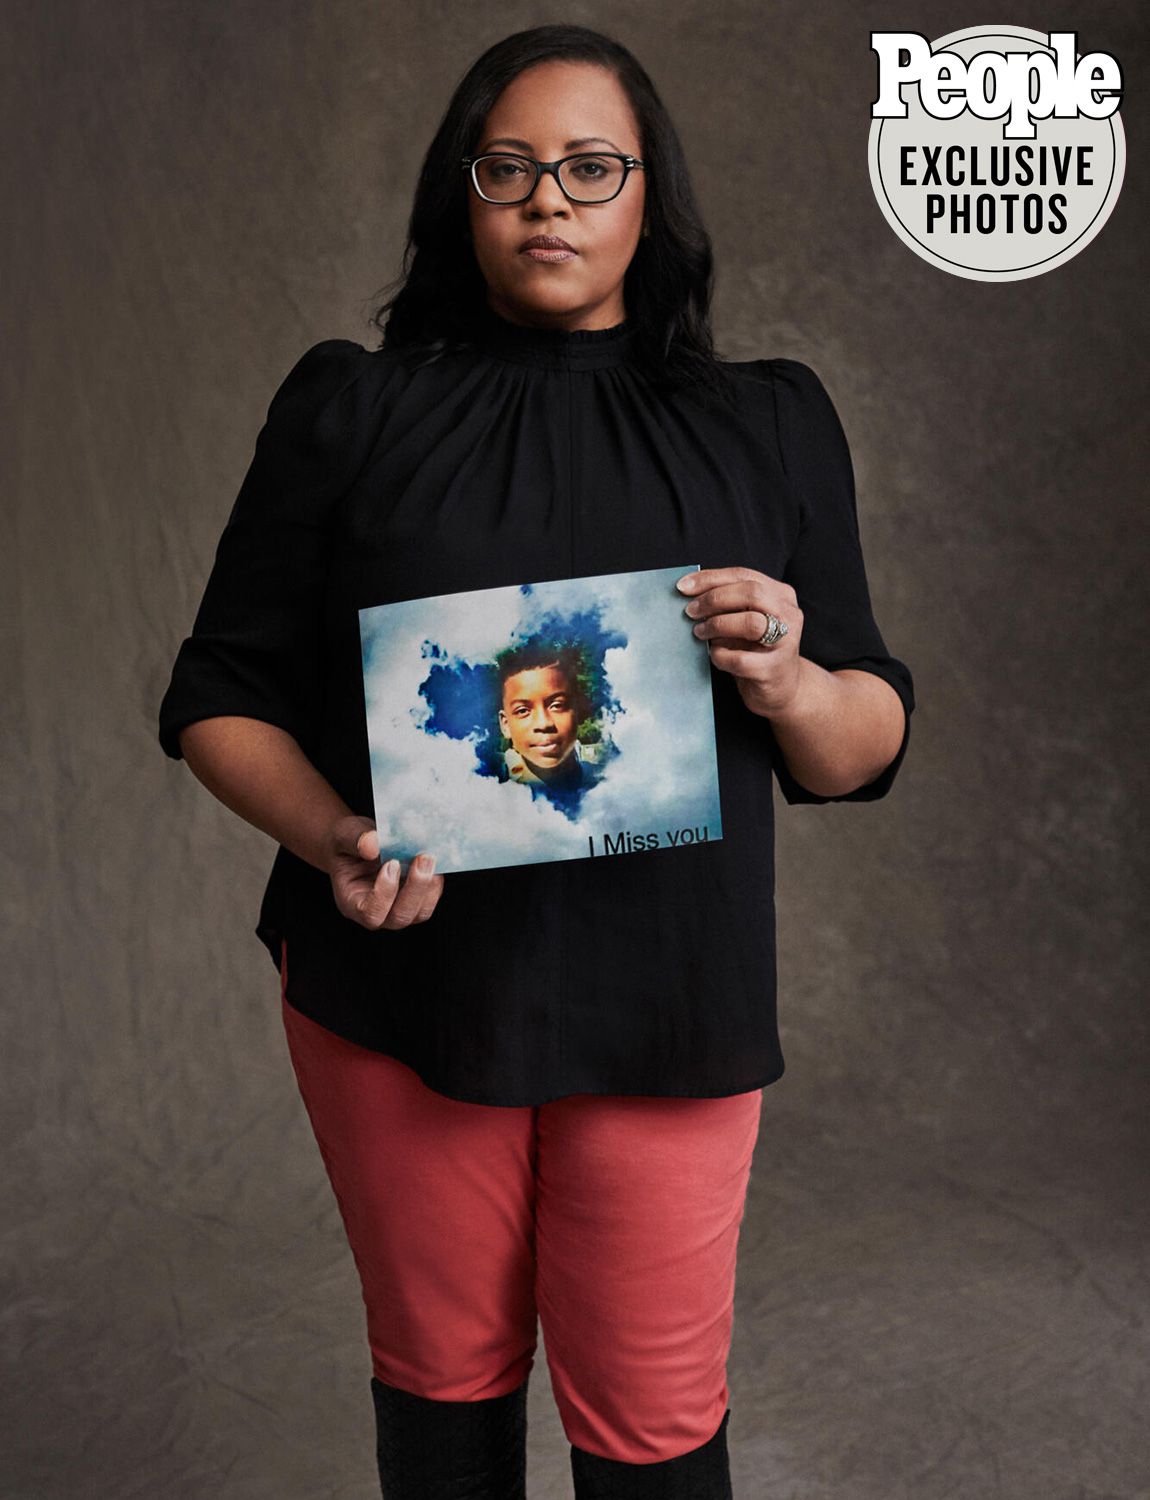 Gun survivors round table: Julvonnia McDowell whose son was shot and killed by a teen playing with a gun. New York, January 11, 2020